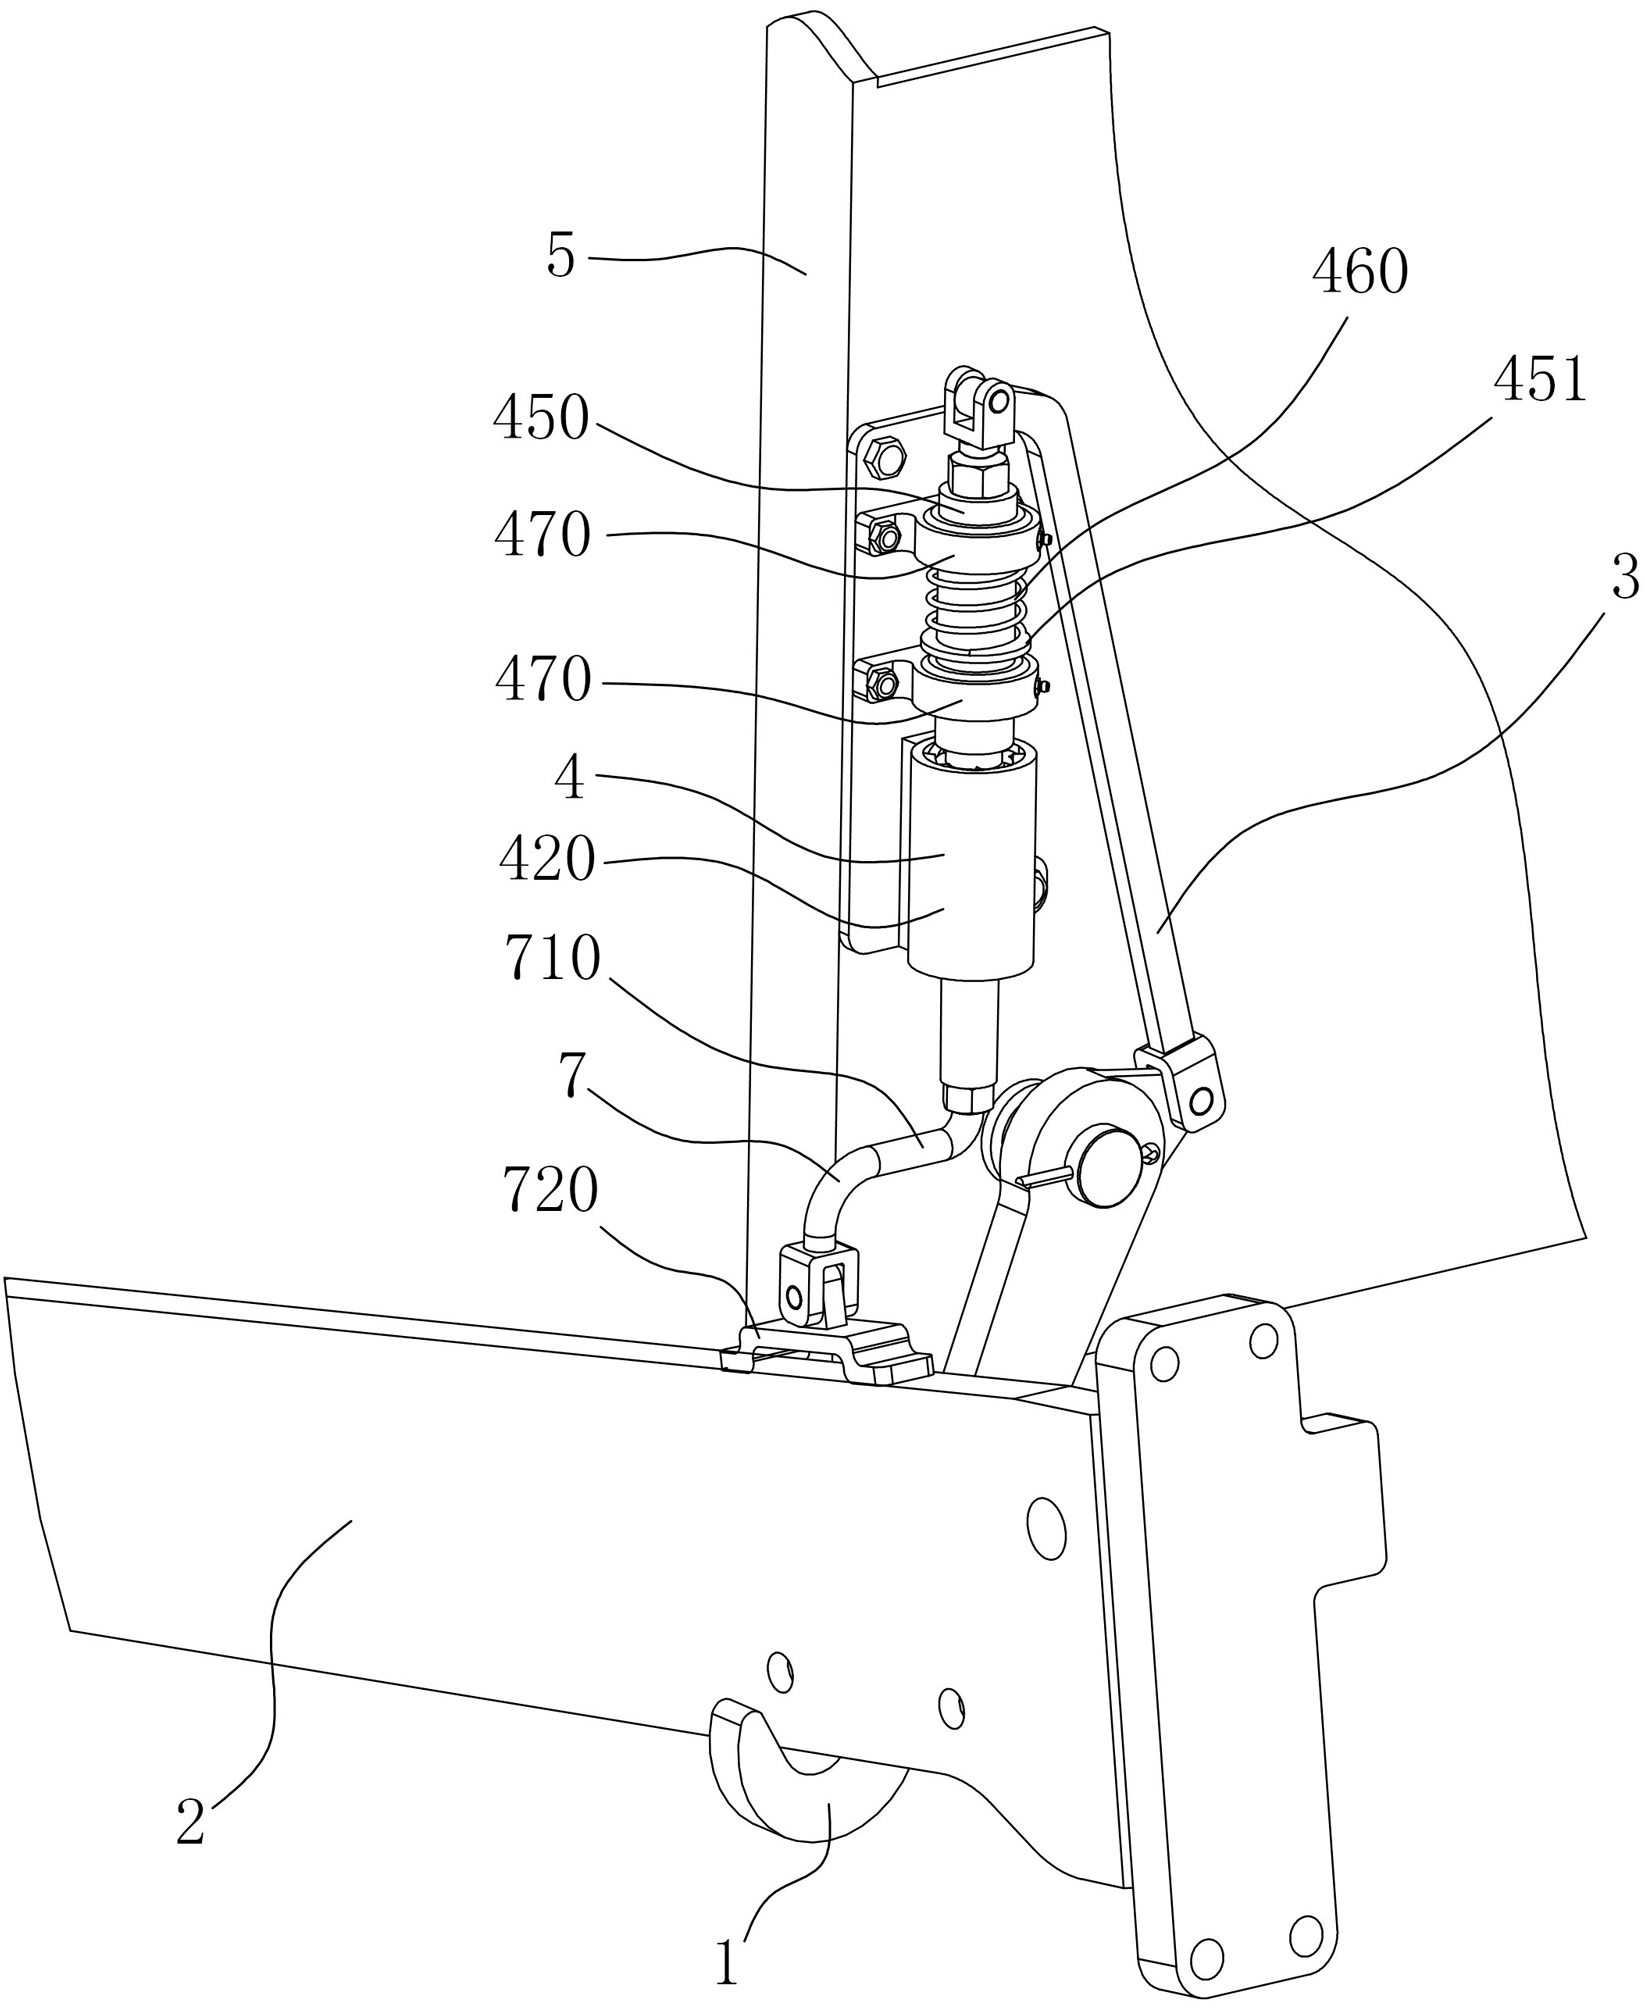 Automatic positioning device in lifting of large arm of spreader and spreader